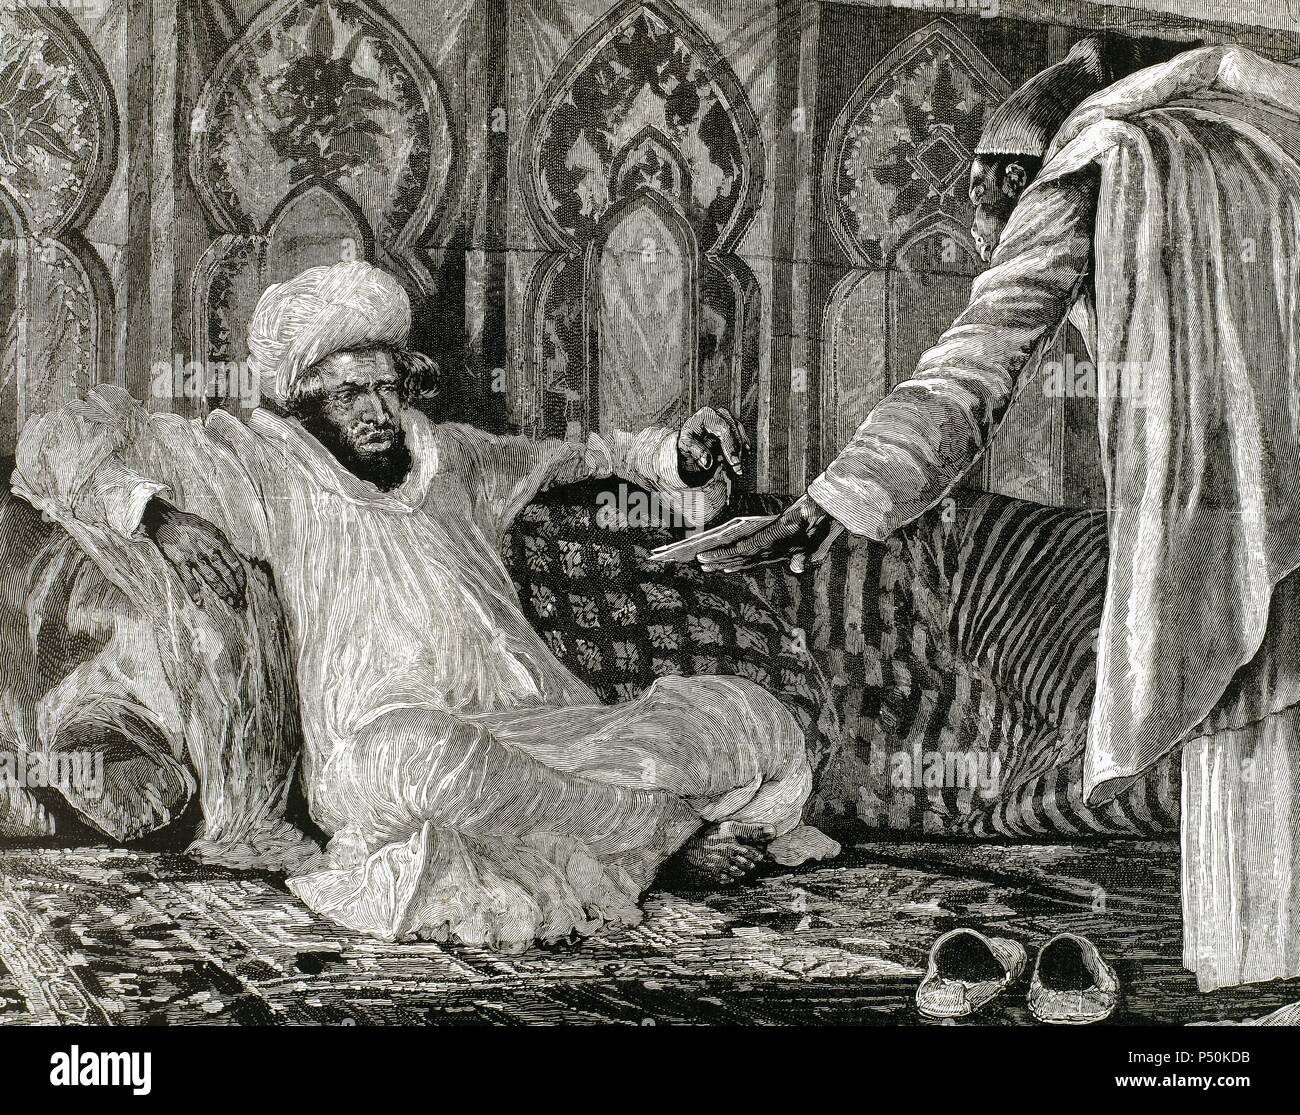 Hassan I (1836-1894). Sultan of Morocco between 1873 and 1894, member of the Alaouite dynasty. The Sultan receives a dispatch. 19 th century engraving R. Caton Woodville. Stock Photo